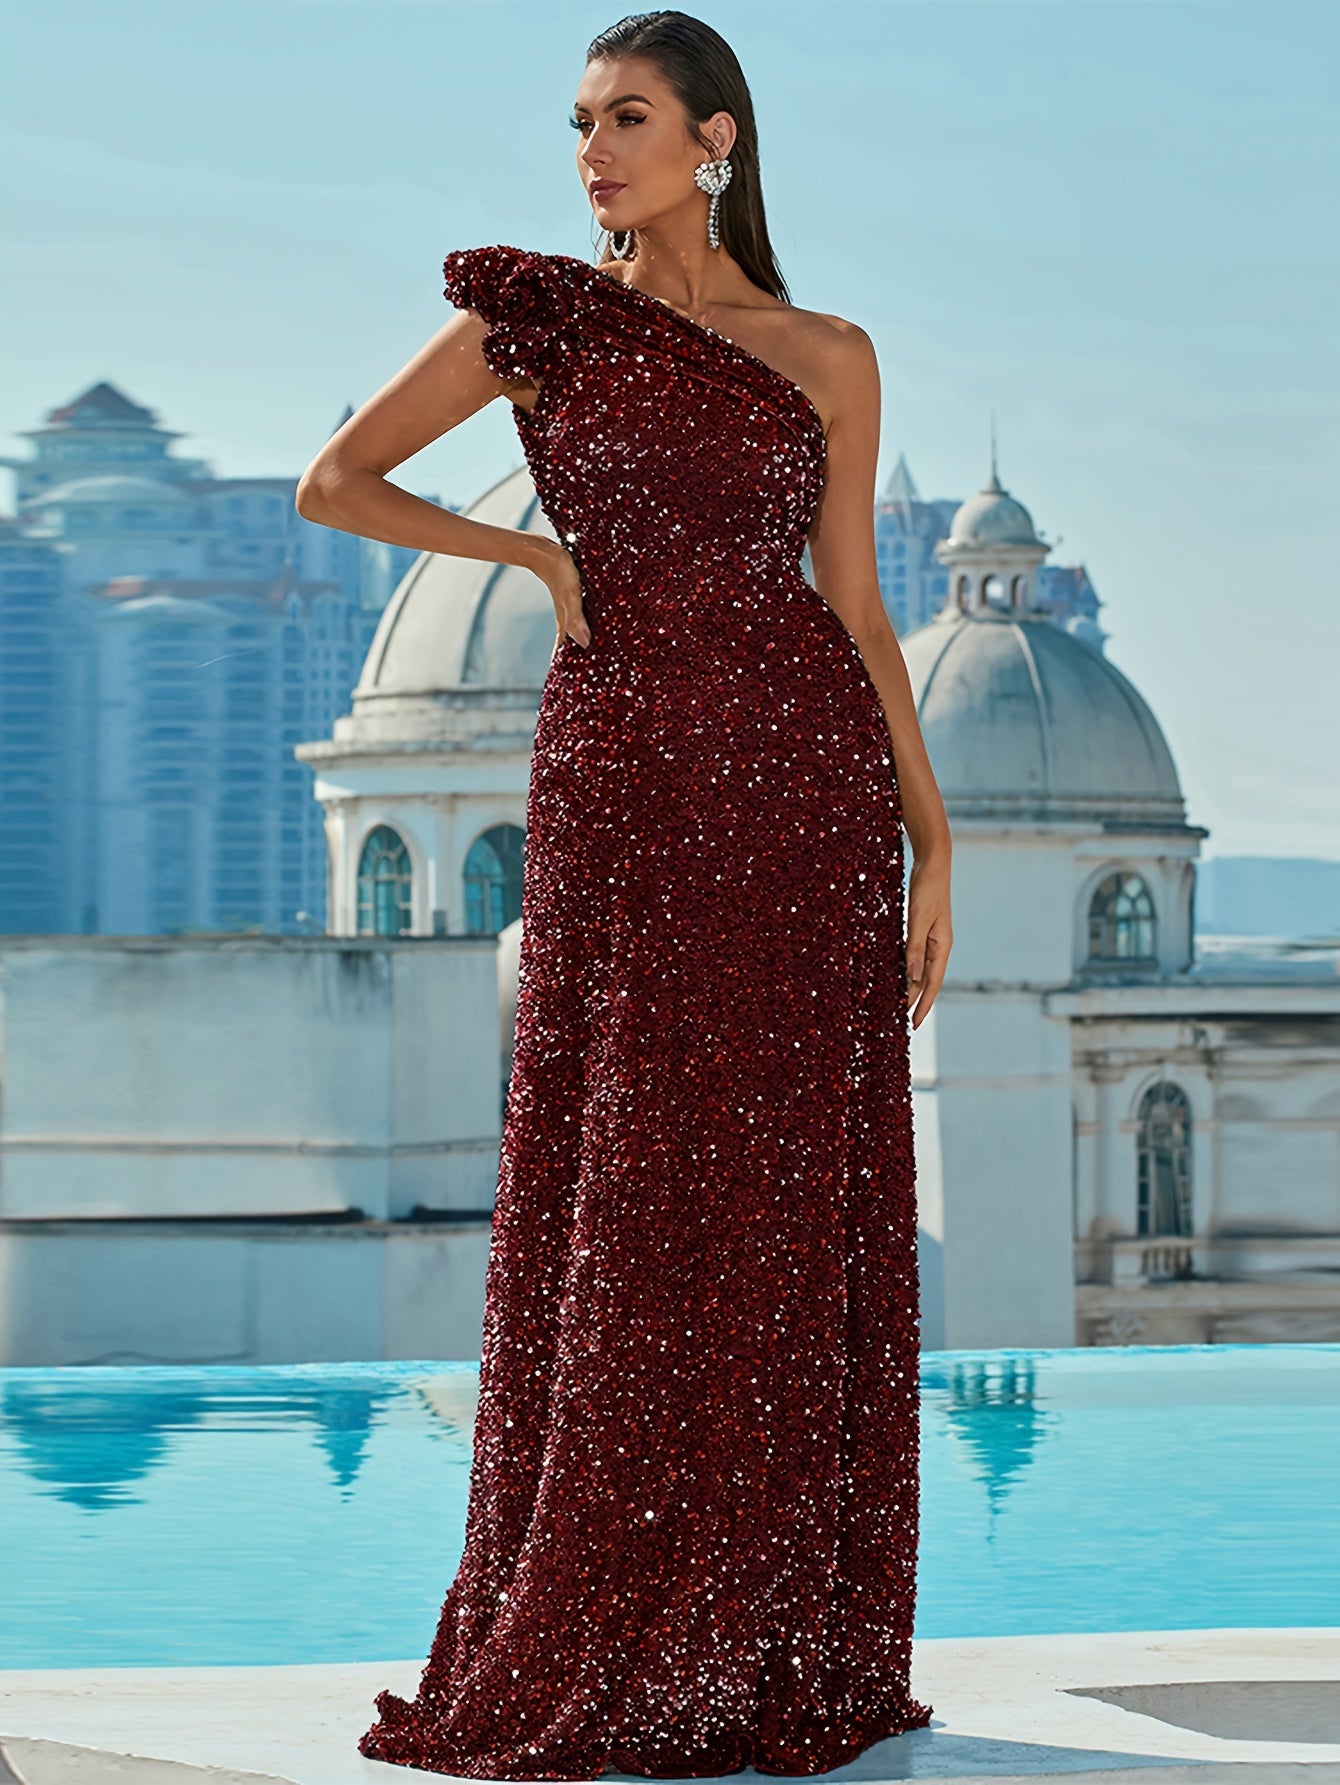 Glittering One Shoulder Sequin Evening Gown - Glamorous & Sleek, Floor-Length Dress for Parties & Banquets - Red Carpet Ready, Womens Formal Wear